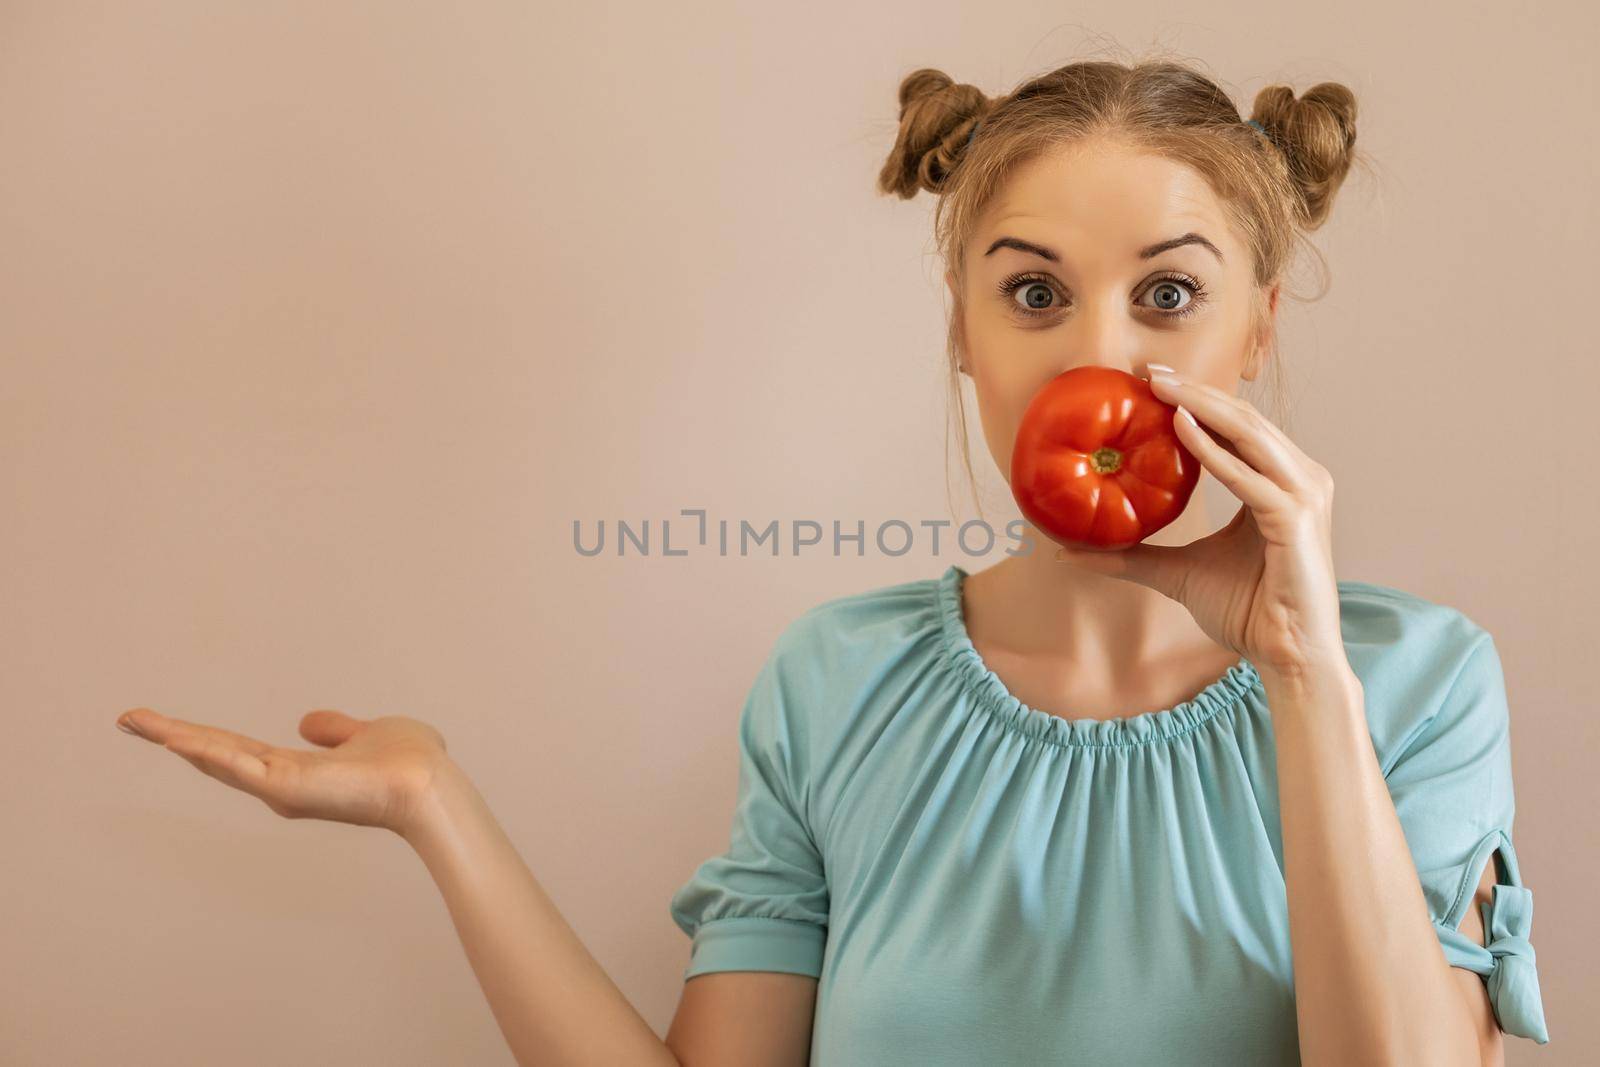 Portrait of cute playful woman holding tomato and gesturing.Toned image.